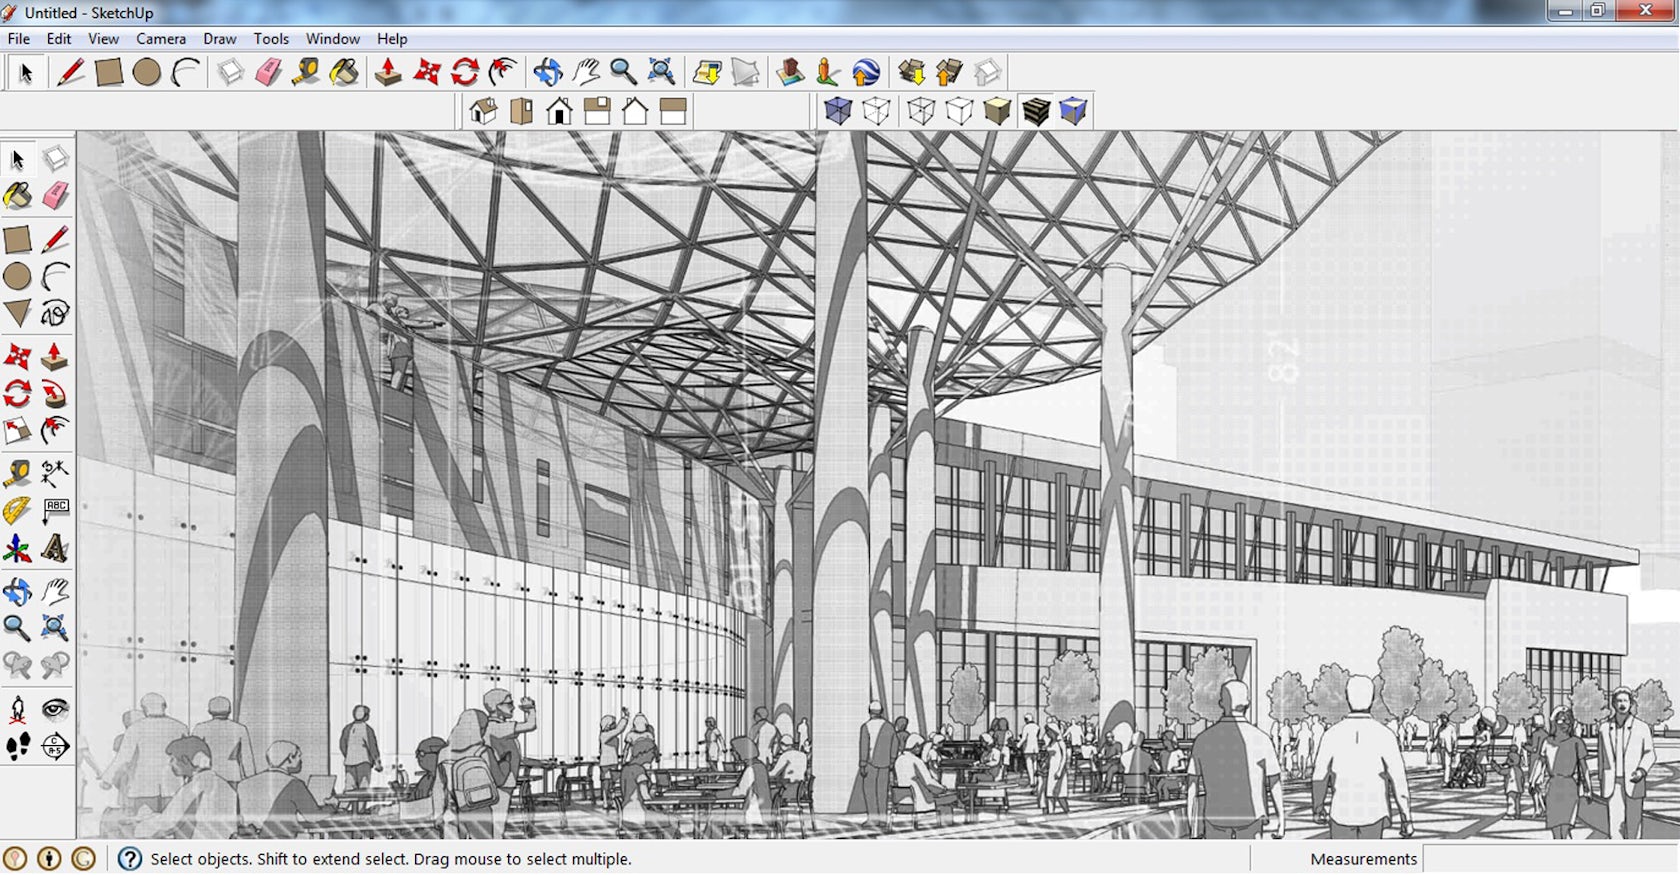 SketchUp Guide The Top 10 Essential Tools to Master in SketchUp First